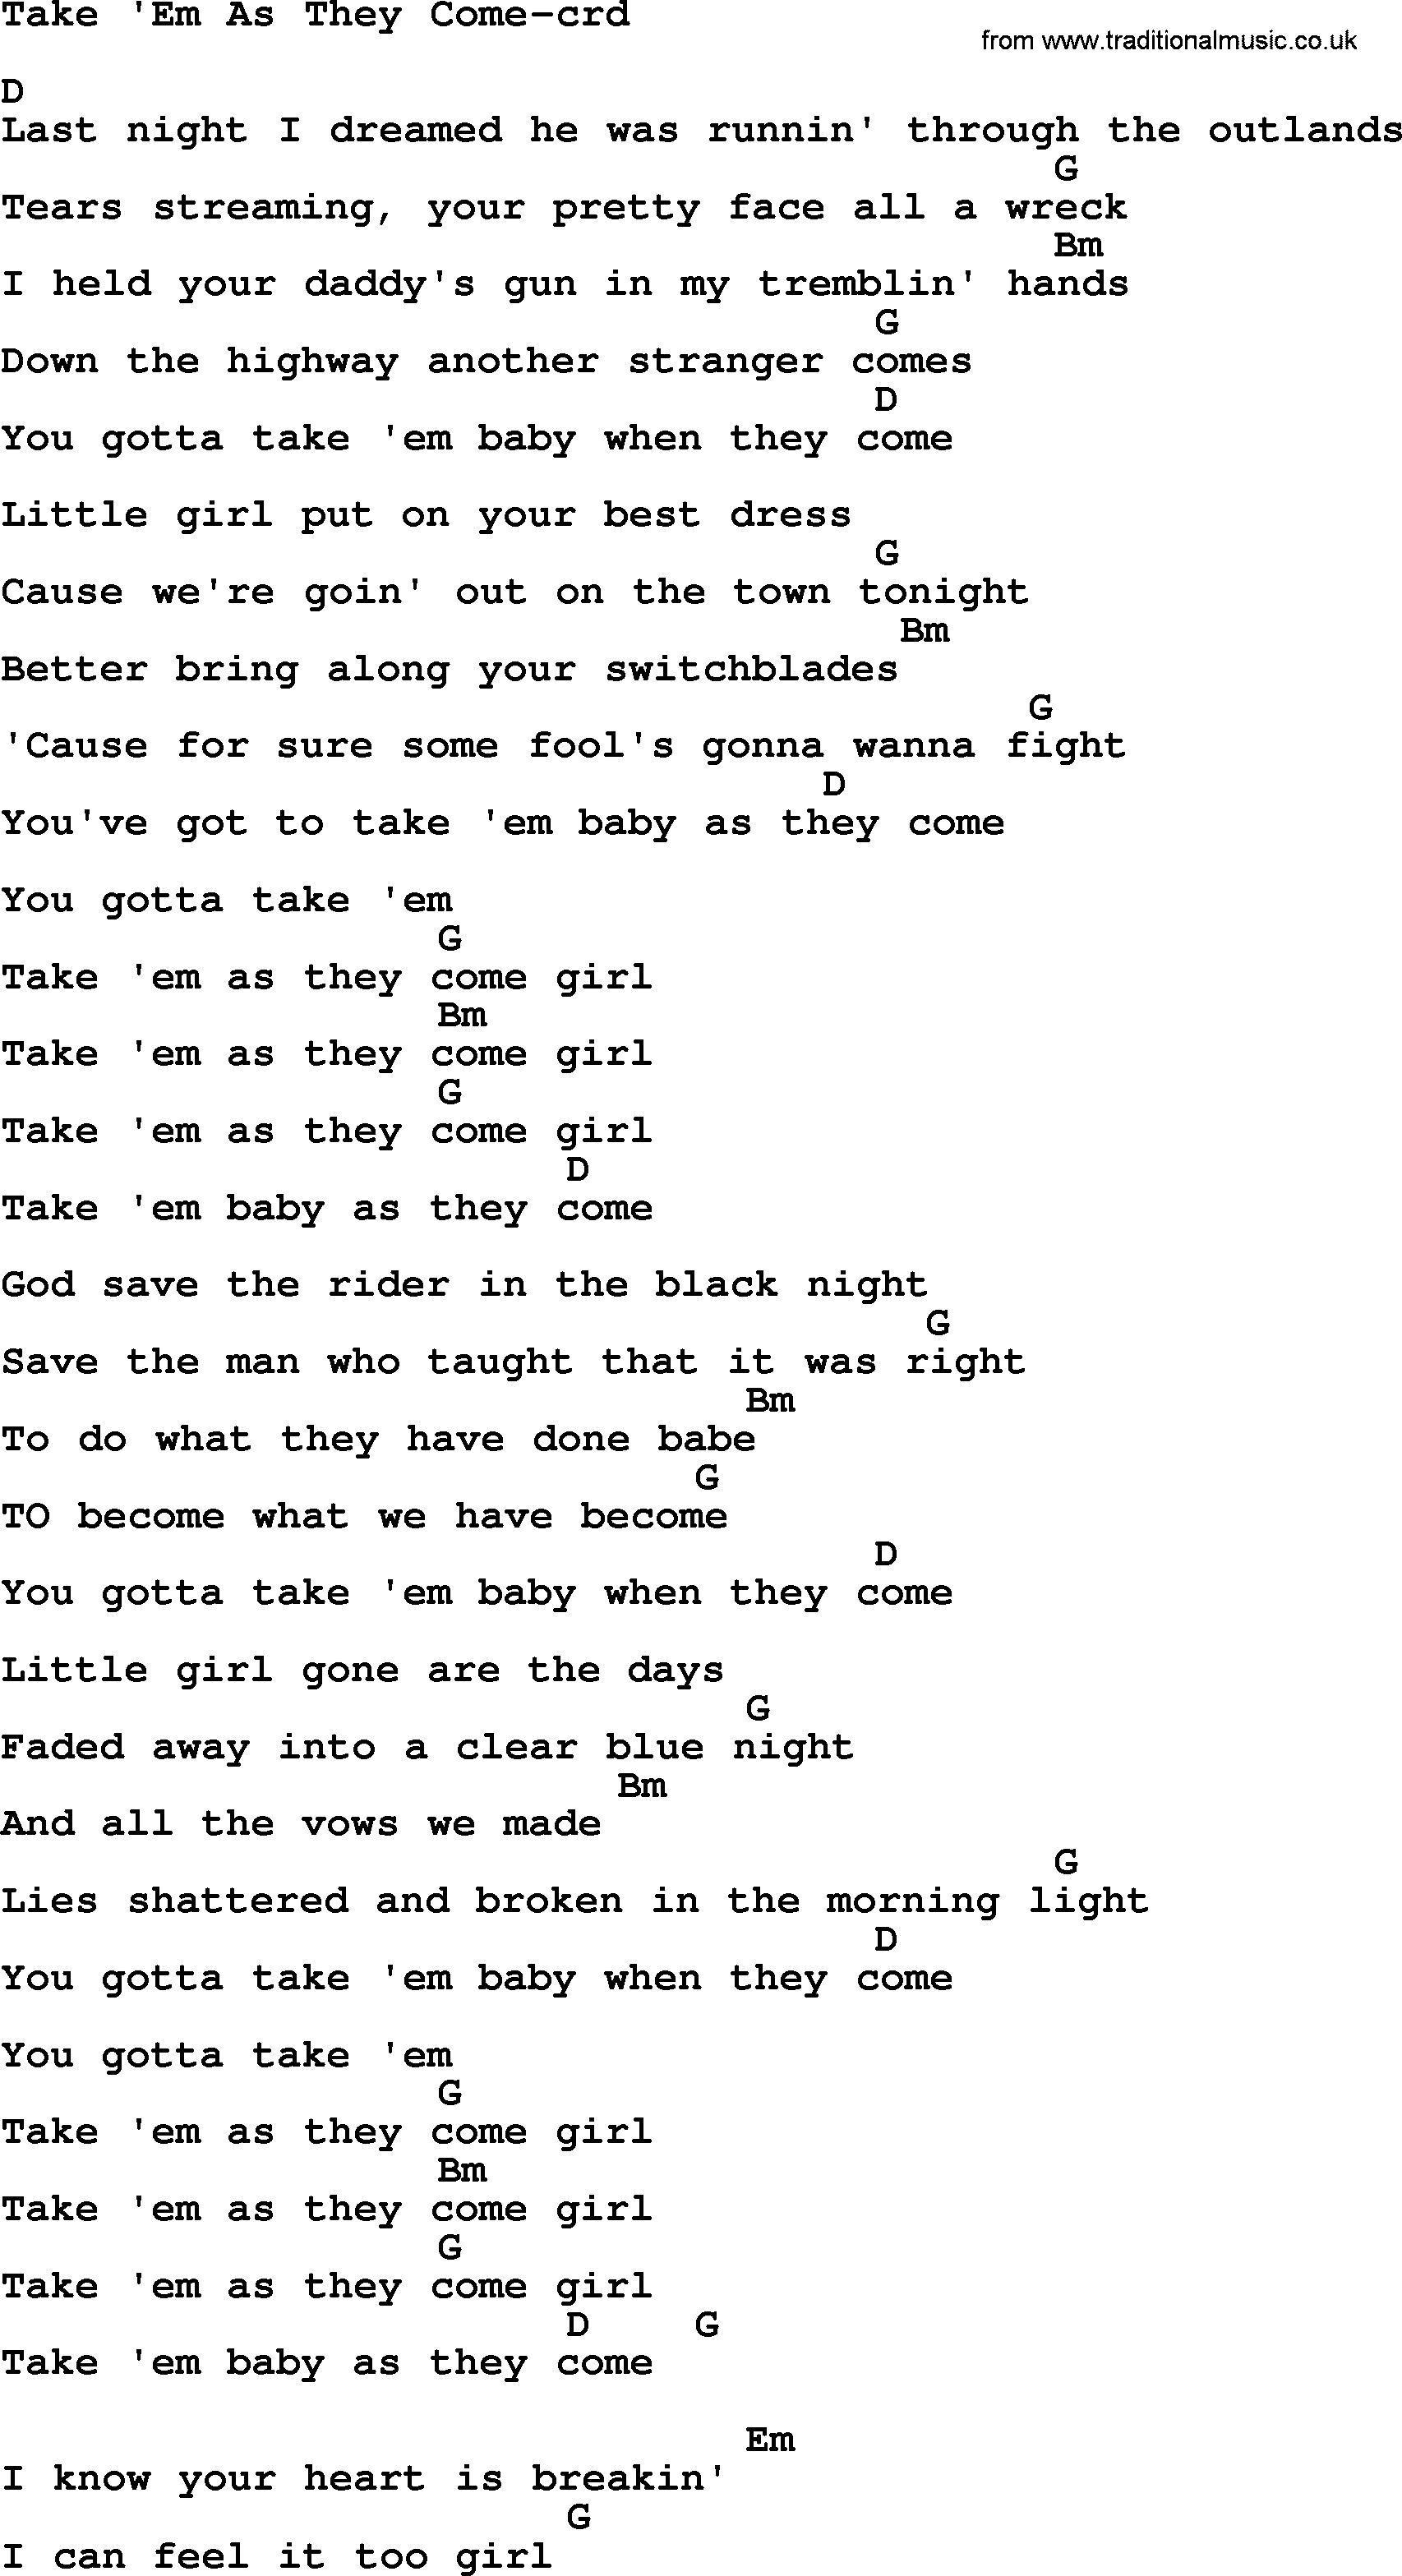 Bruce Springsteen song: Take 'em As They Come, lyrics and chords